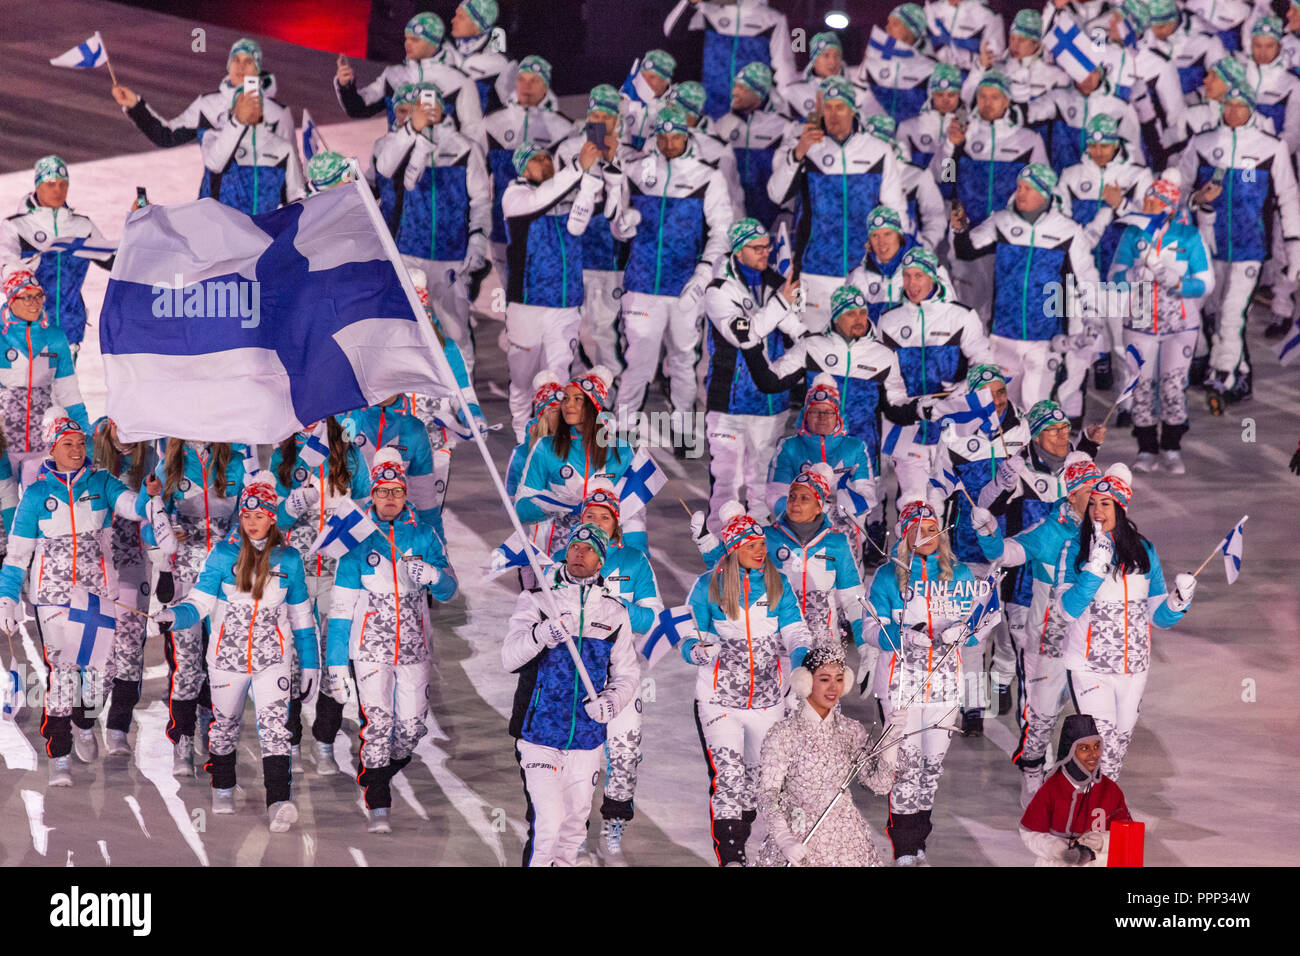 Team Finland marching in the Opening Ceremonies at the Olympic Winter Games PyeongChang 2018 Stock Photo